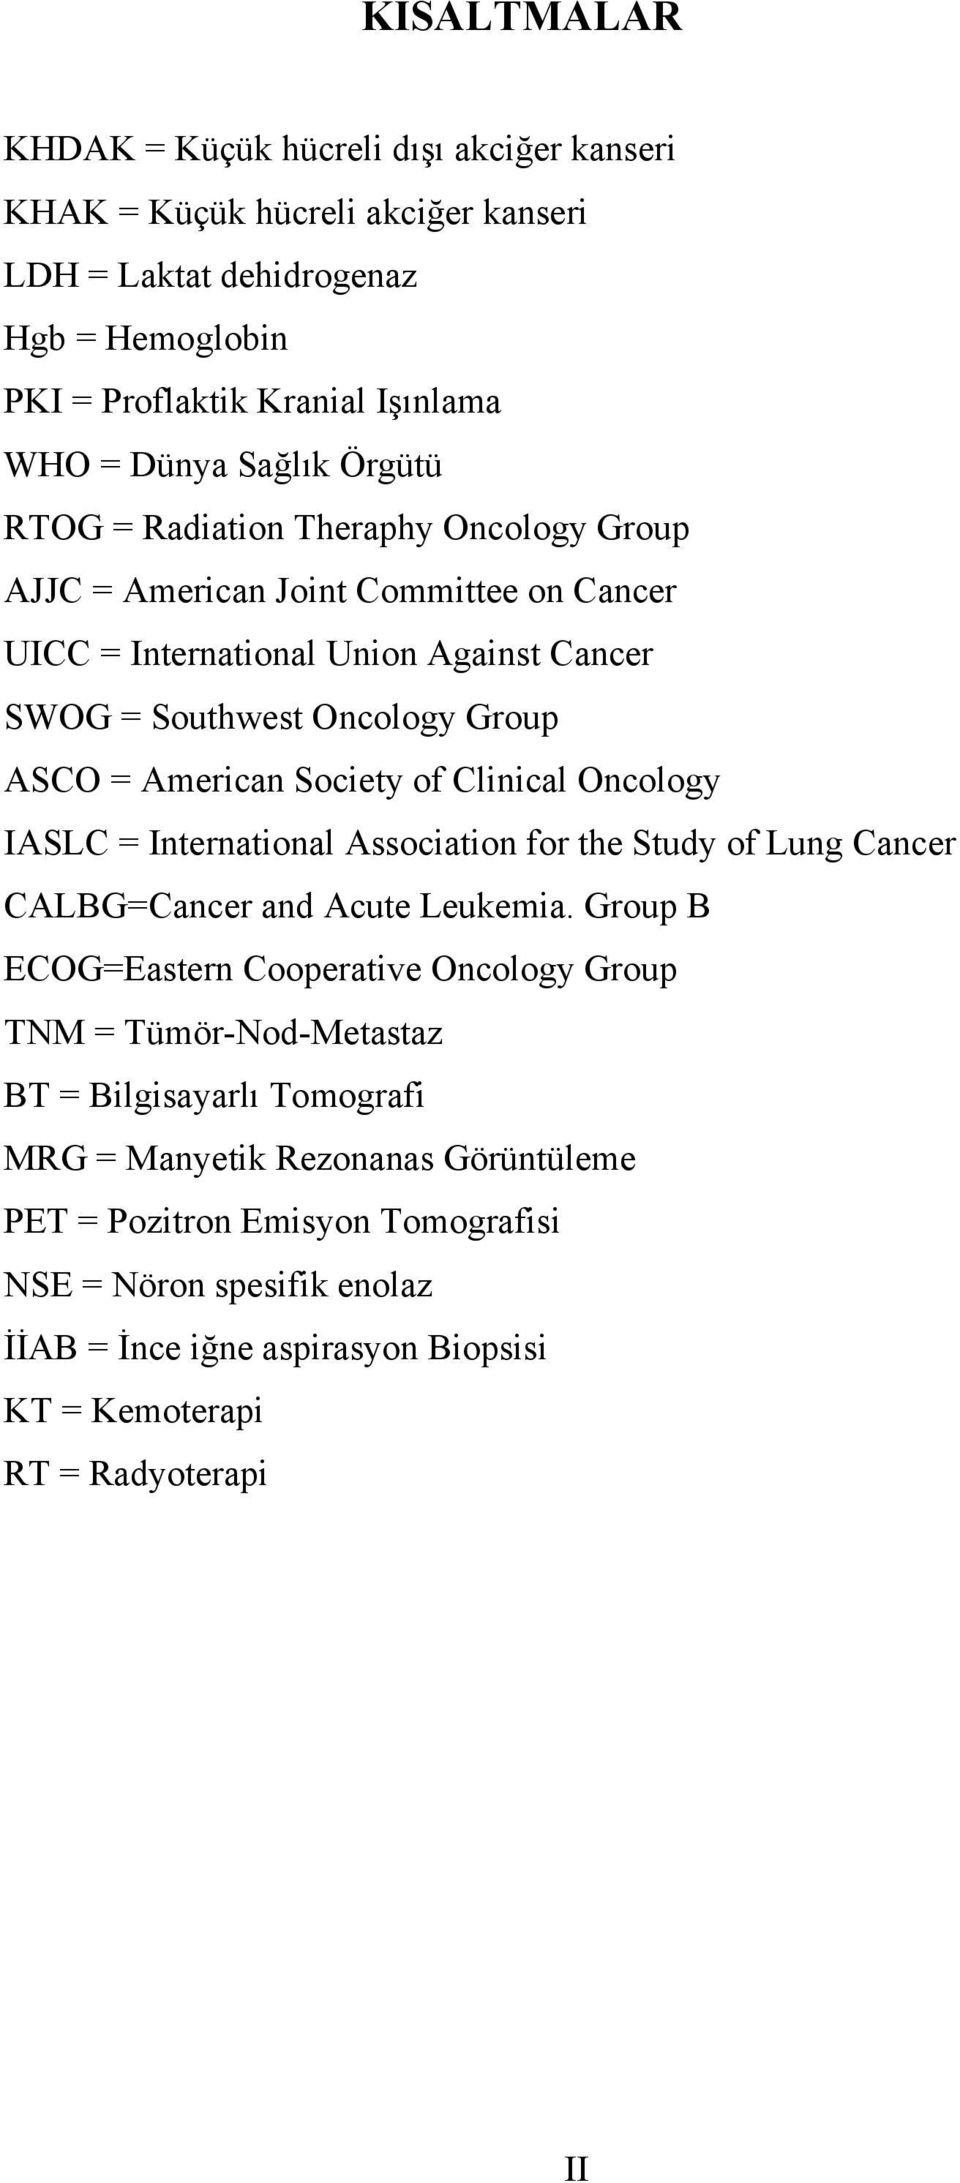 Clinical Oncology IASLC = International Association for the Study of Lung Cancer CALBG=Cancer and Acute Leukemia.